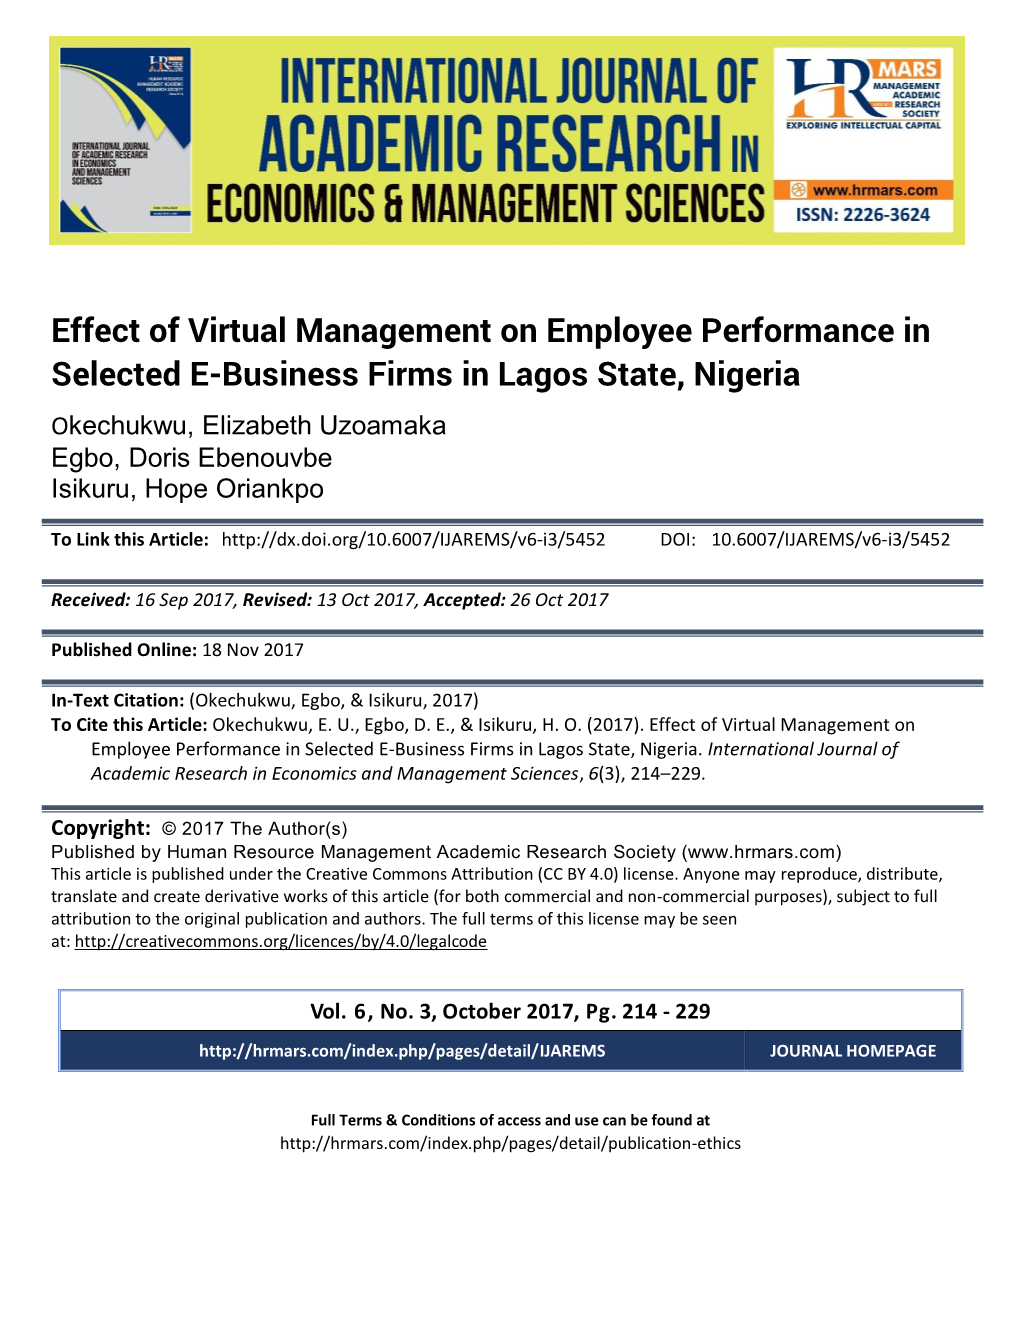 Effect of Virtual Management on Employee Performance in Selected E-Business Firms in Lagos State, Nigeria